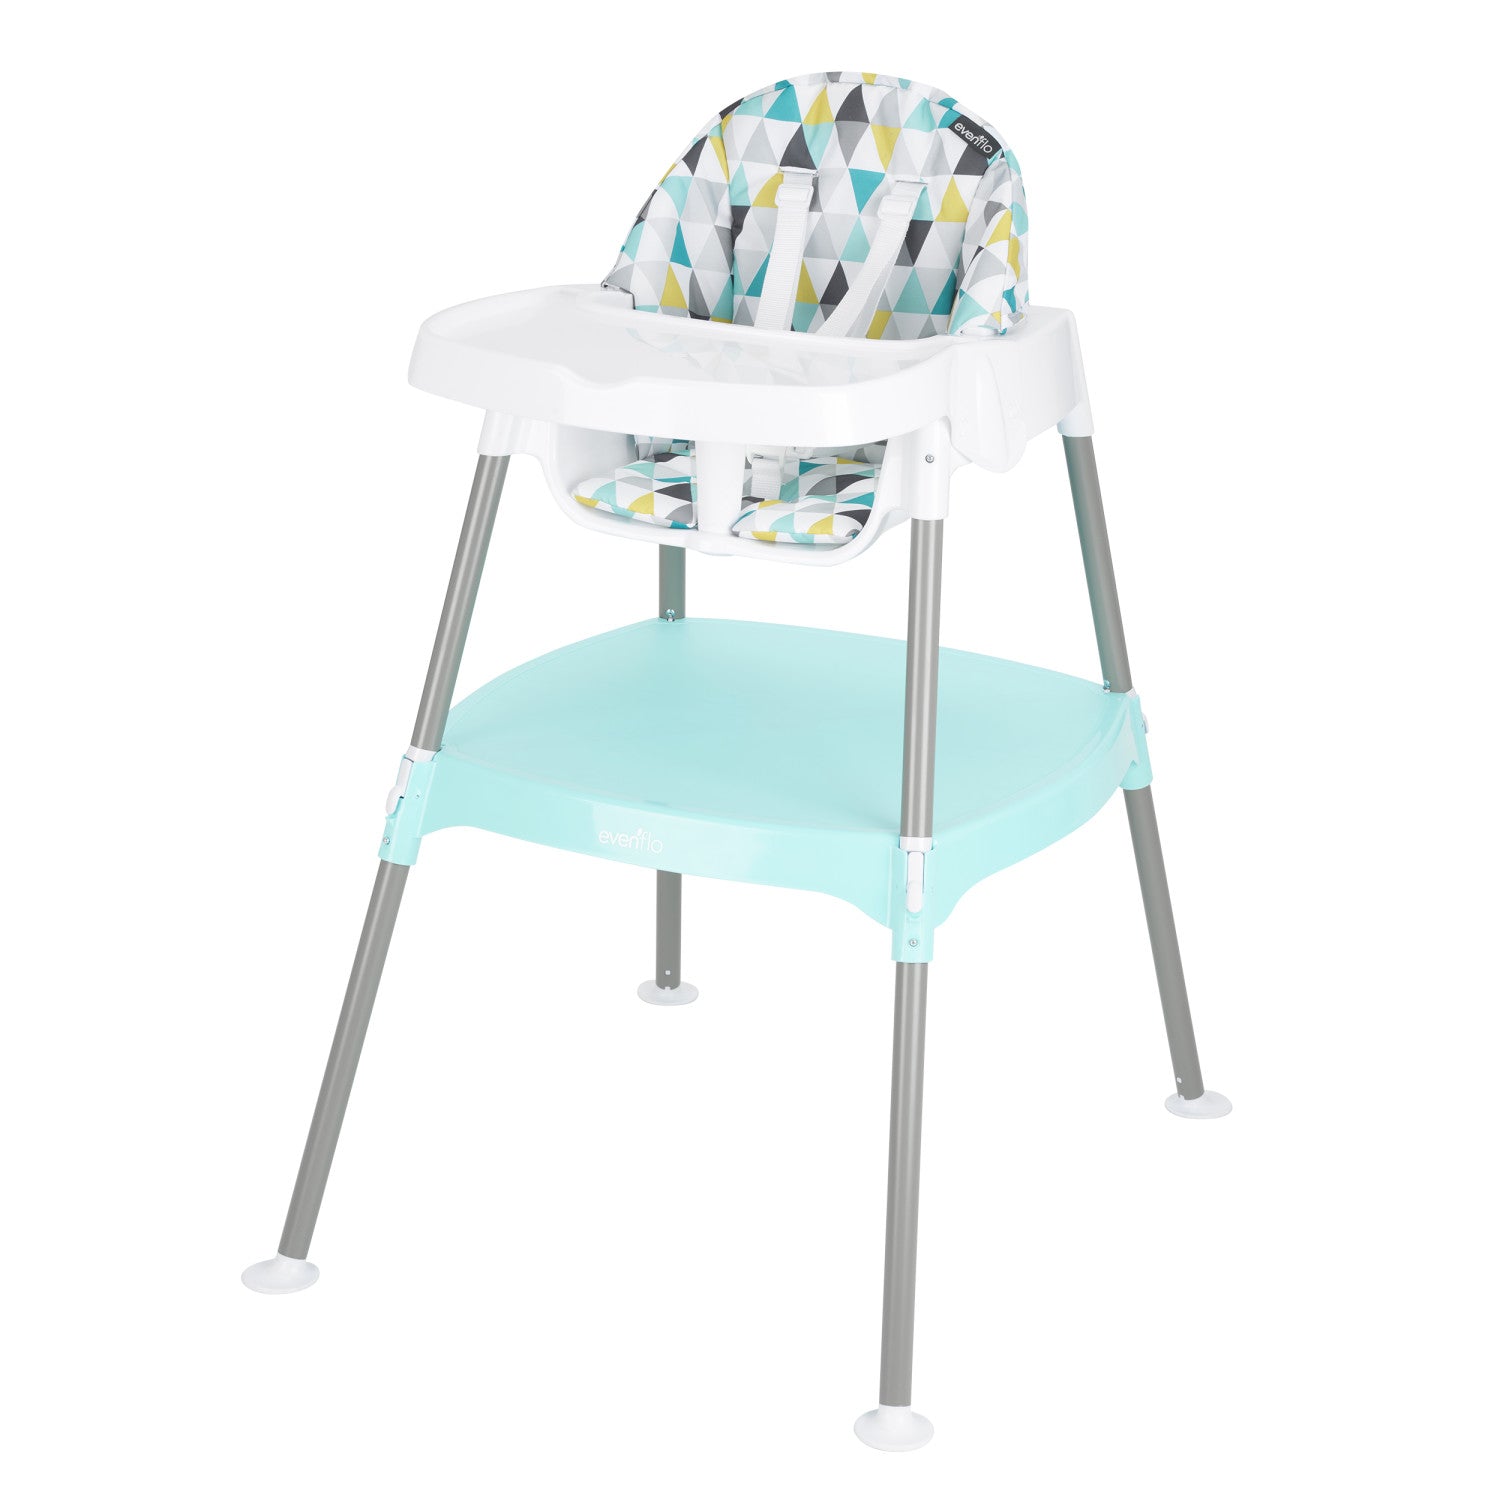 Evenflo Eat and Grow 4-in-1 Convertible High Chair, Prism Triangles